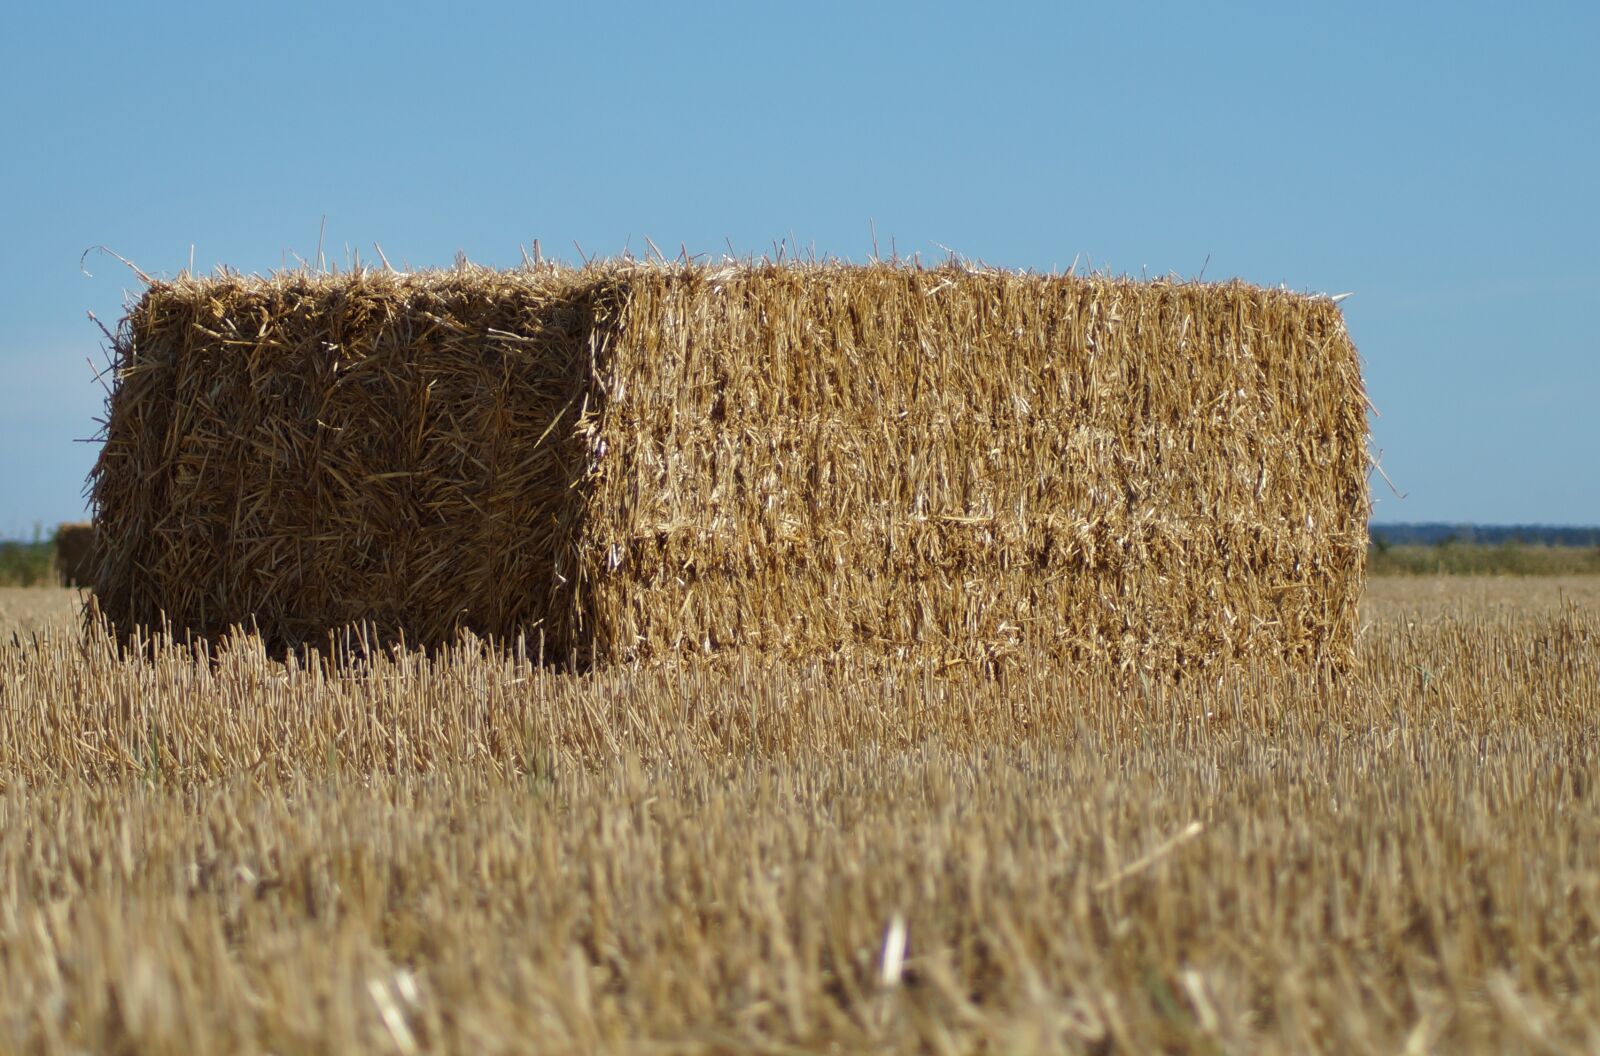 Sony SLT-A57 sample photo. Straw bales, square, pressed photography